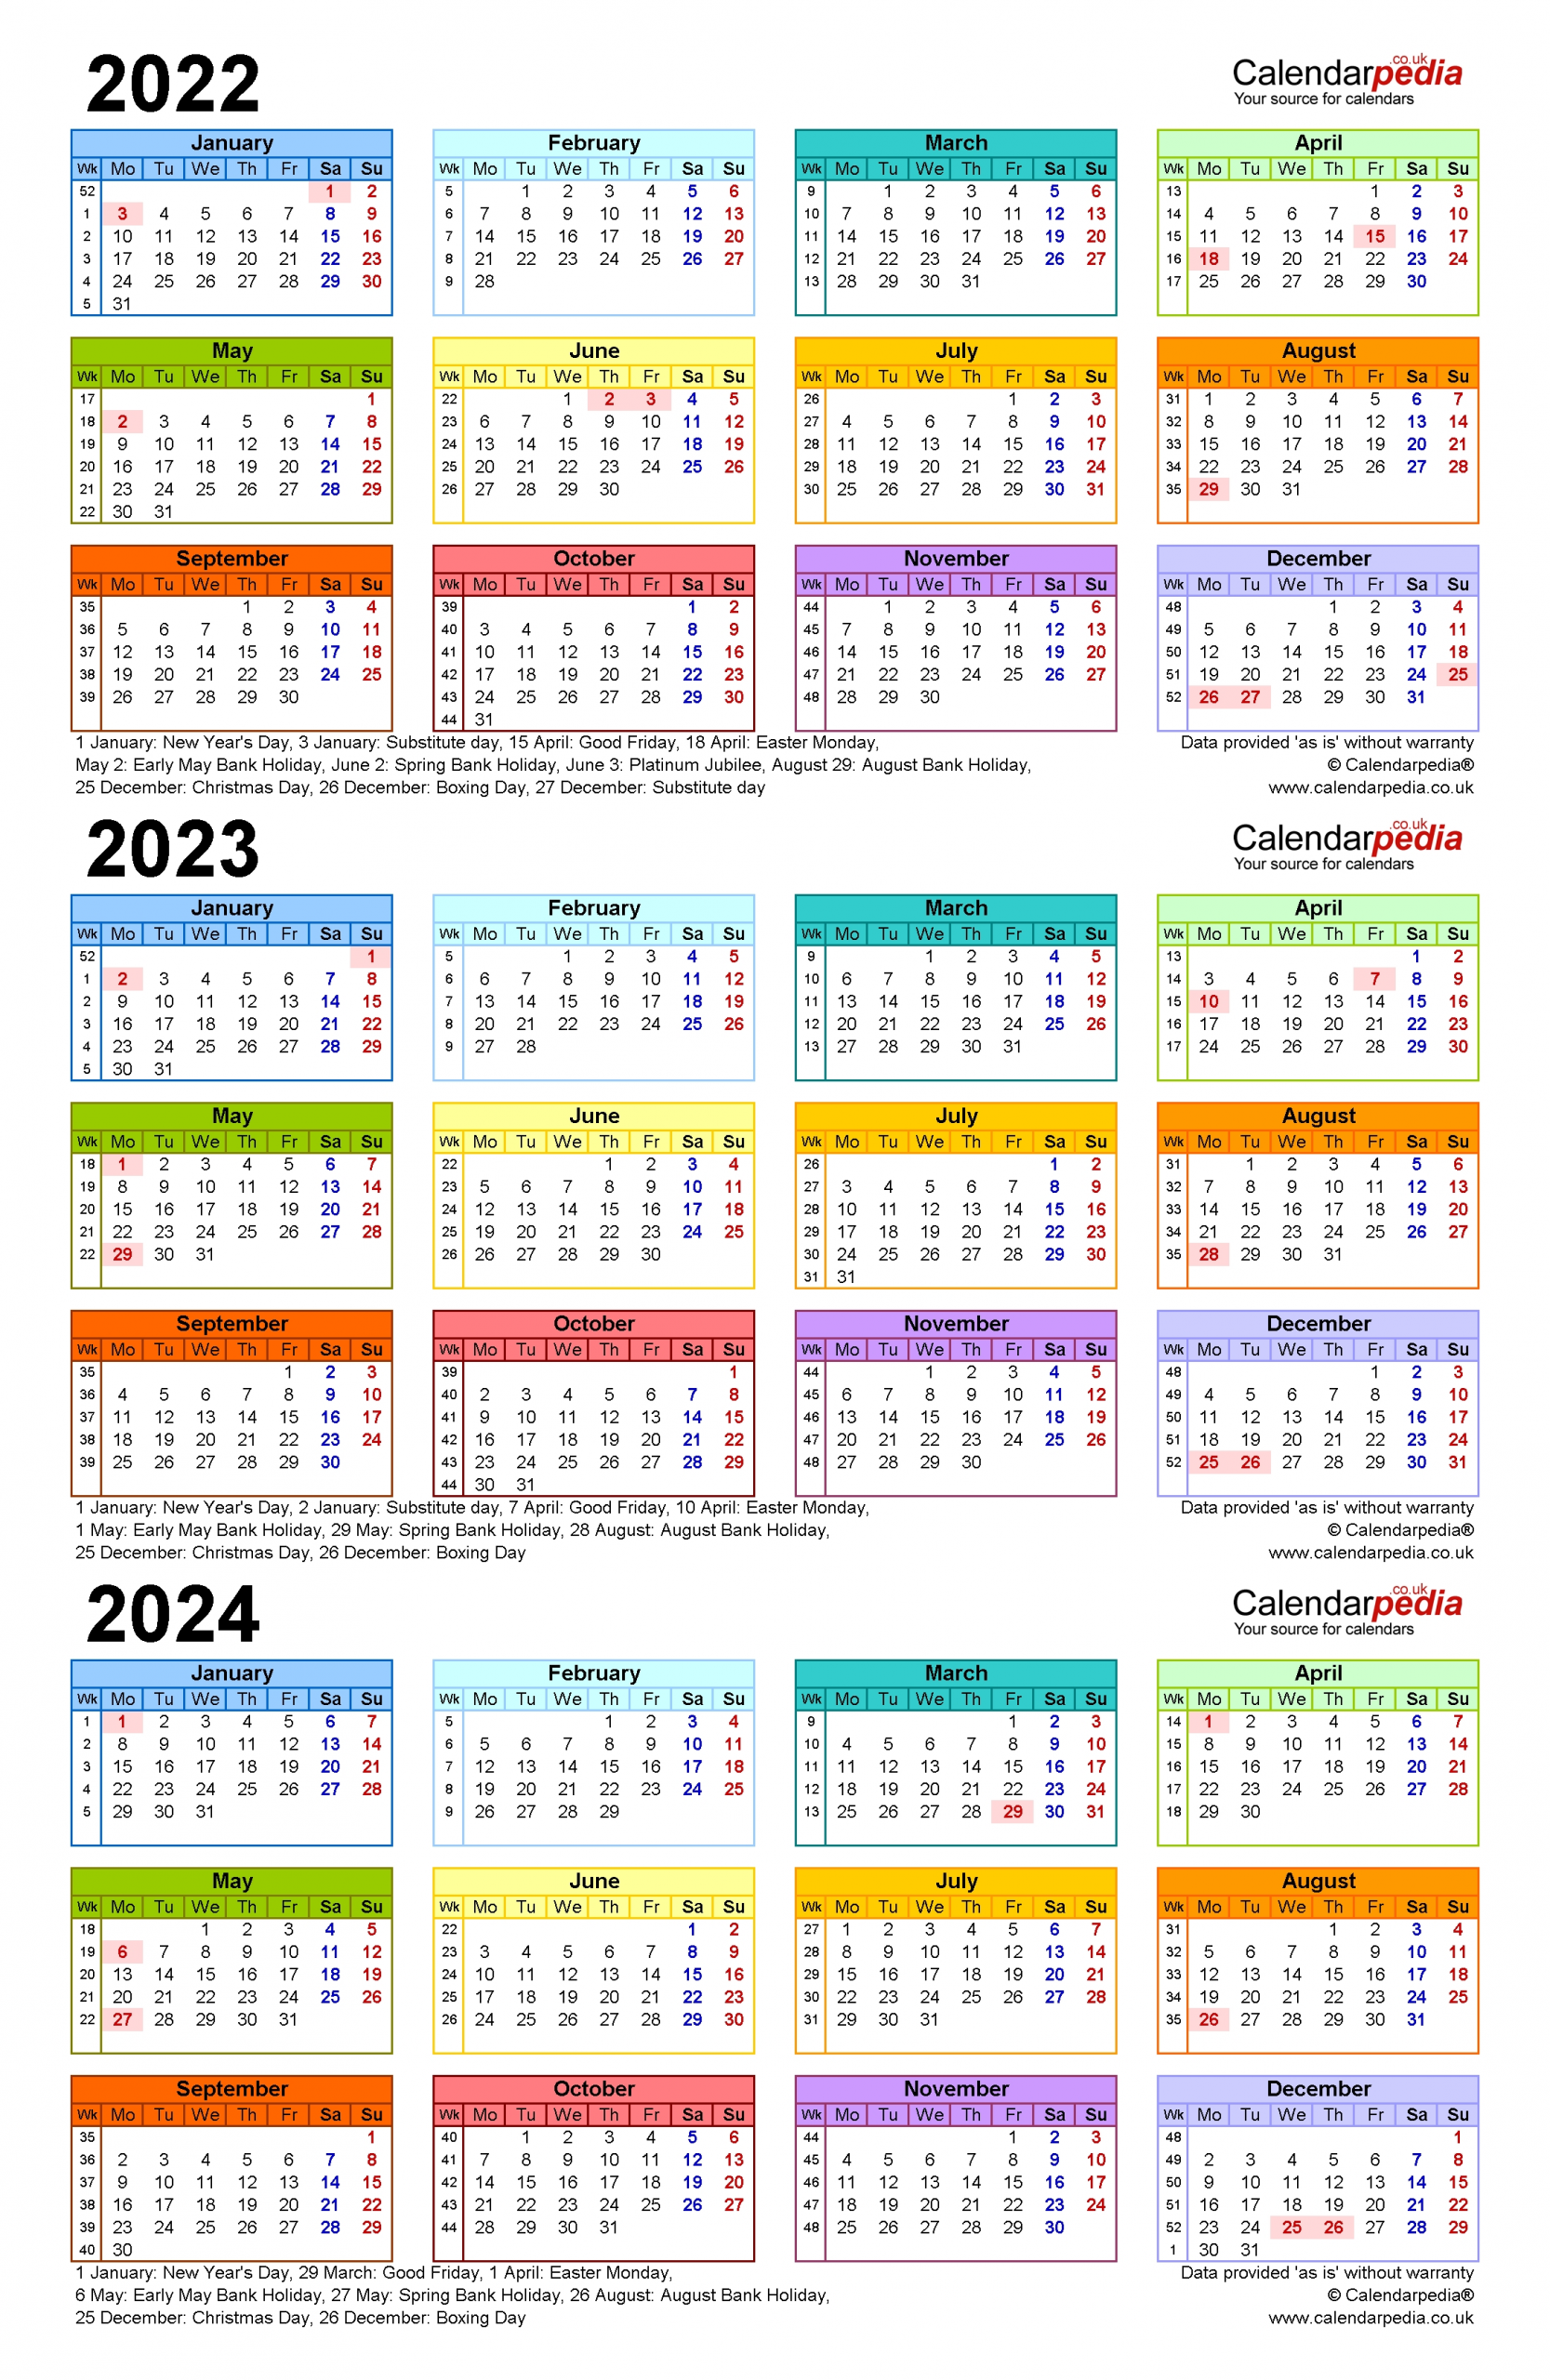 Three Year Calendars For 2022, 2023 &amp; 2024 (Uk) For Pdf